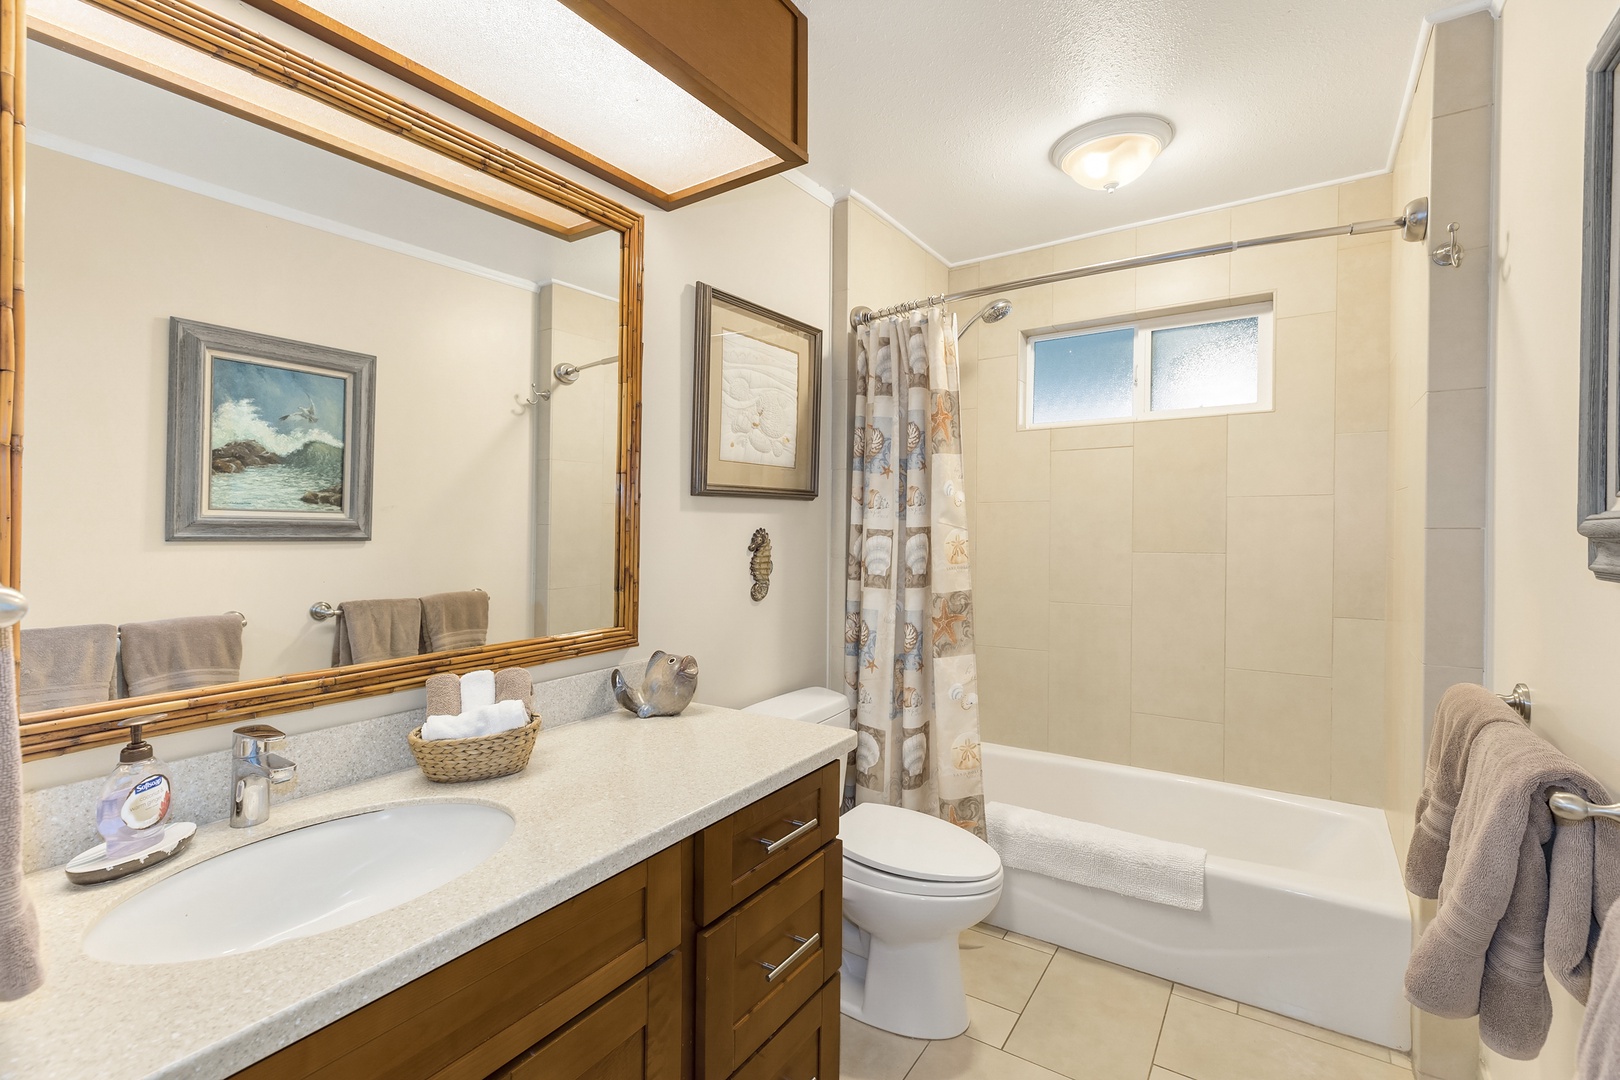 Haleiwa Vacation Rentals, Hale Kimo - Shared bathroom with ample vanity space.